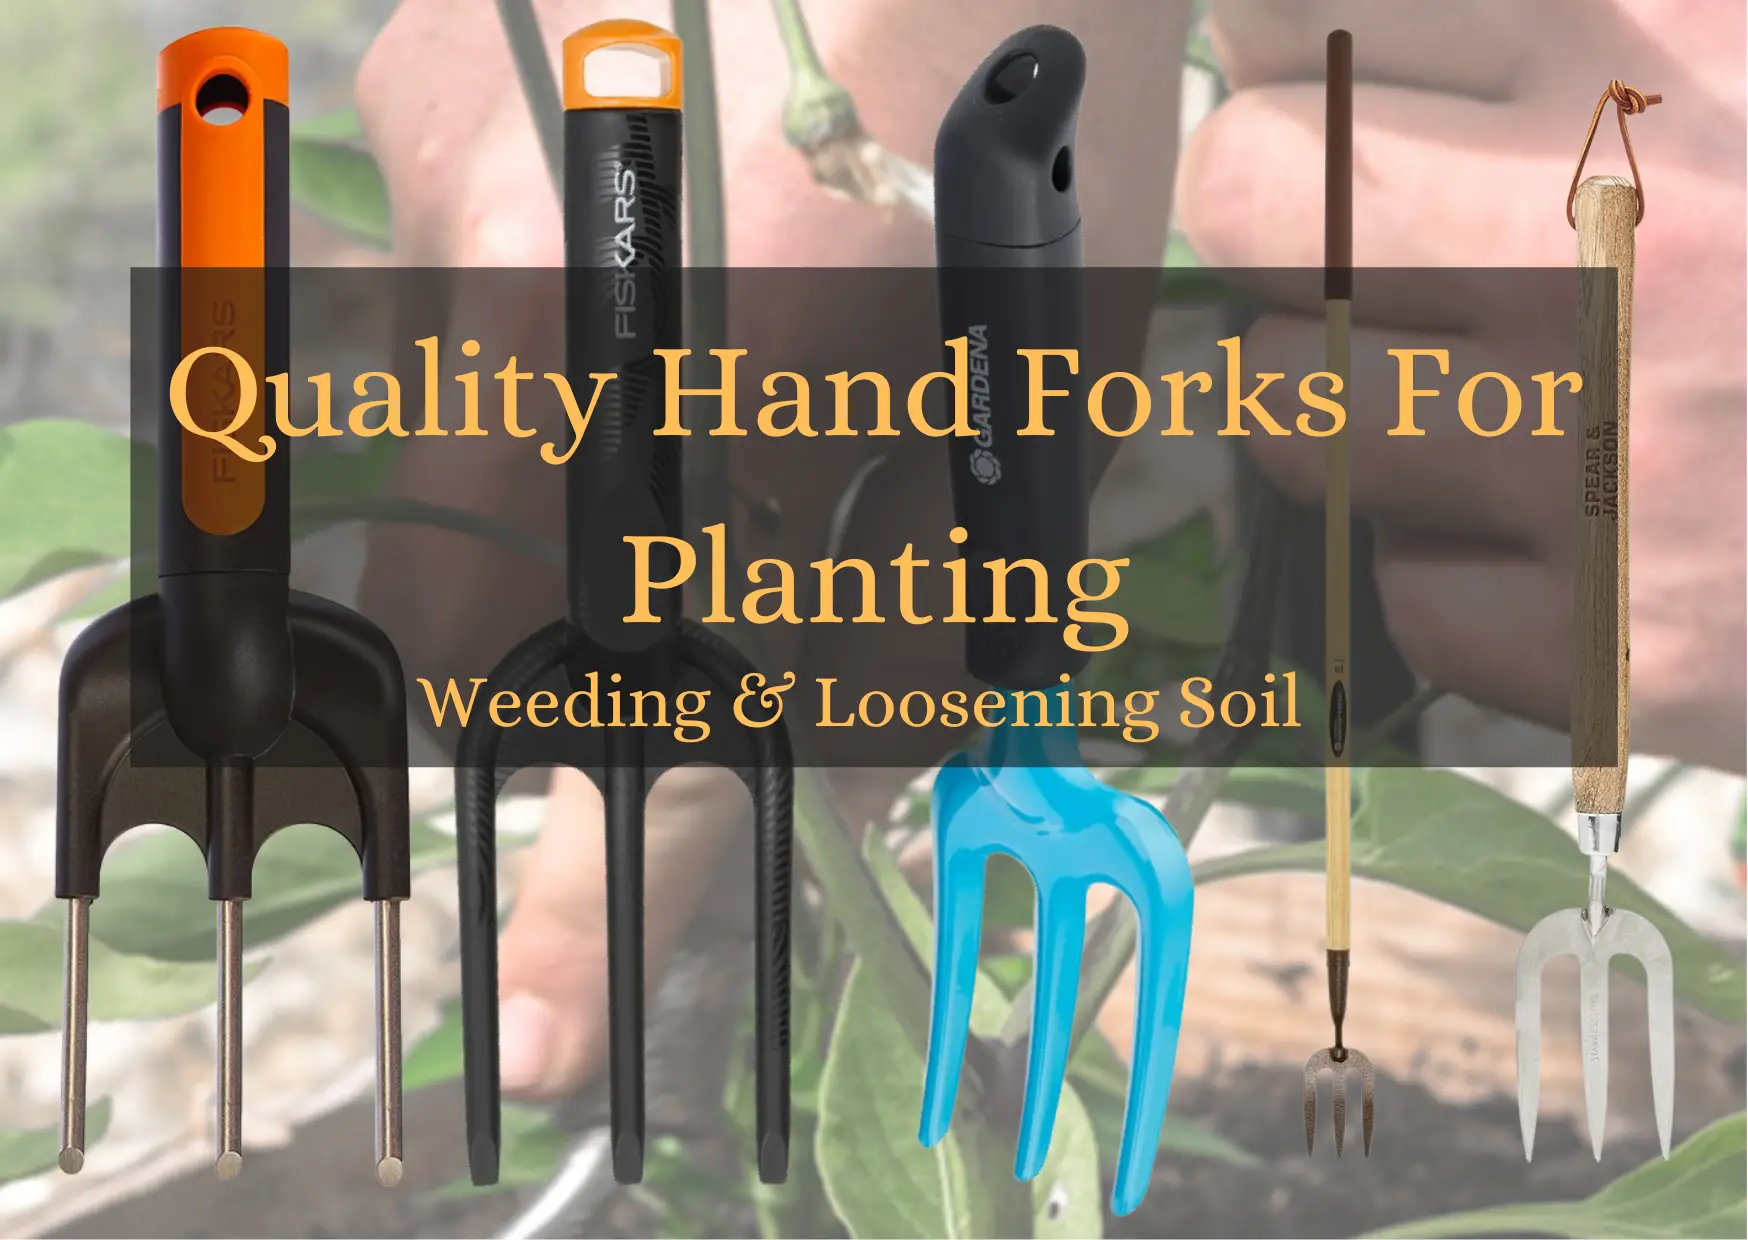 Quality Hand Forks For Planting